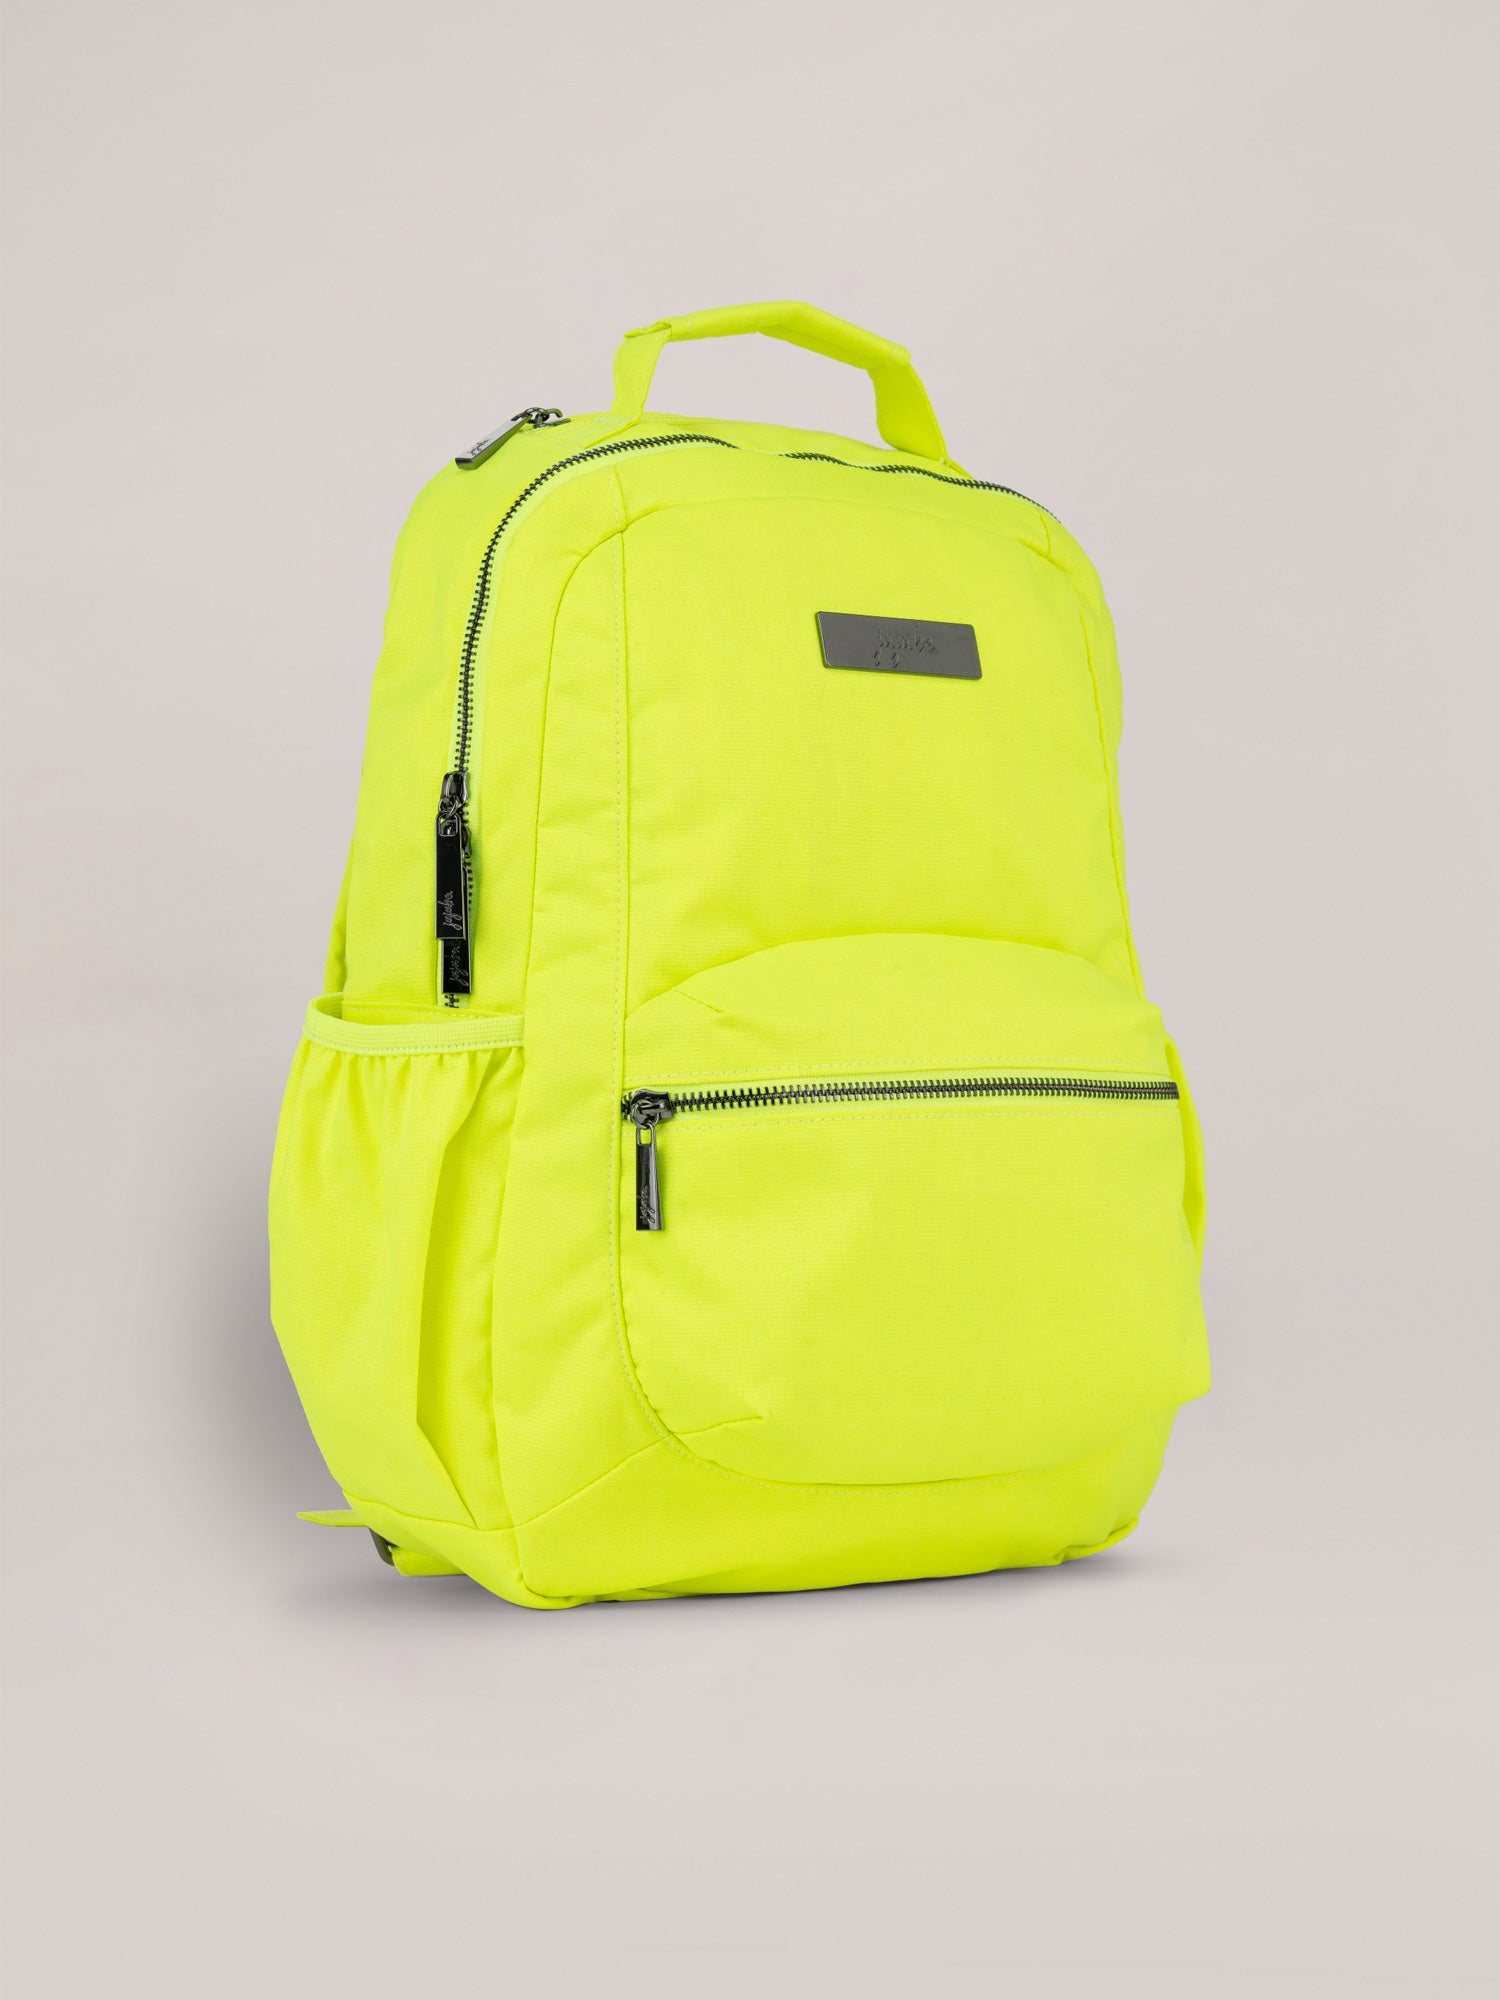 Neon Yellow Be Packed Backpack Quarter Angle View